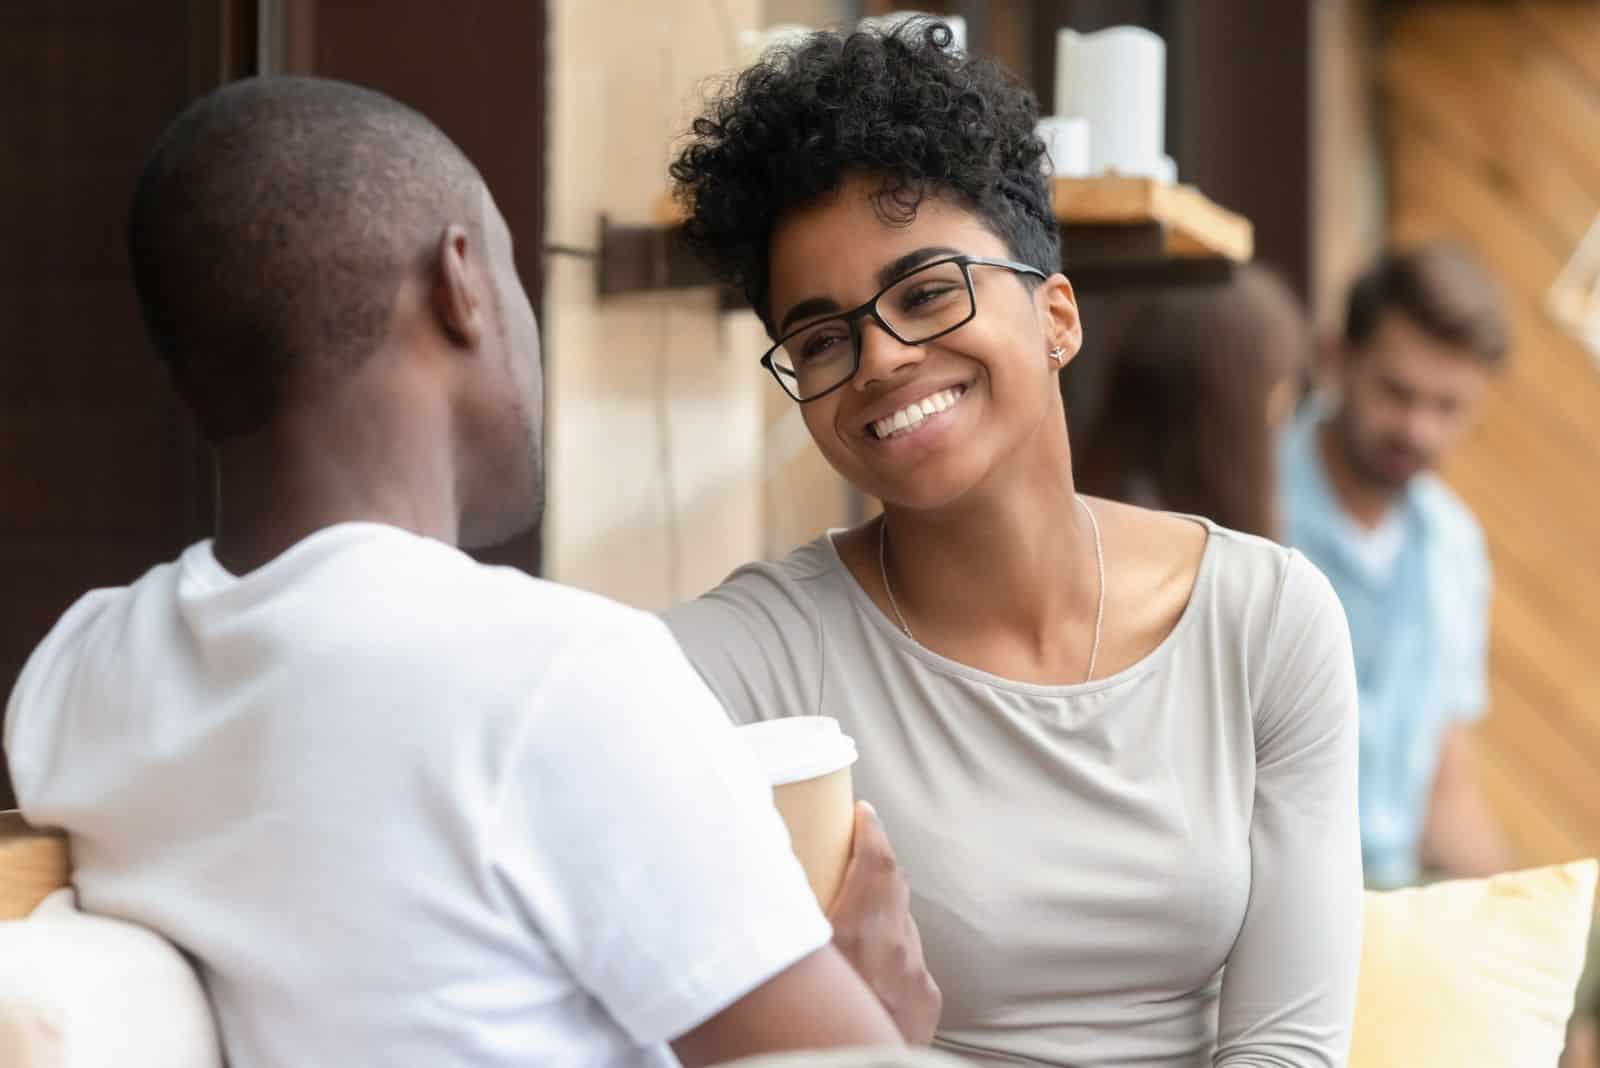 smiling woman talking with a man